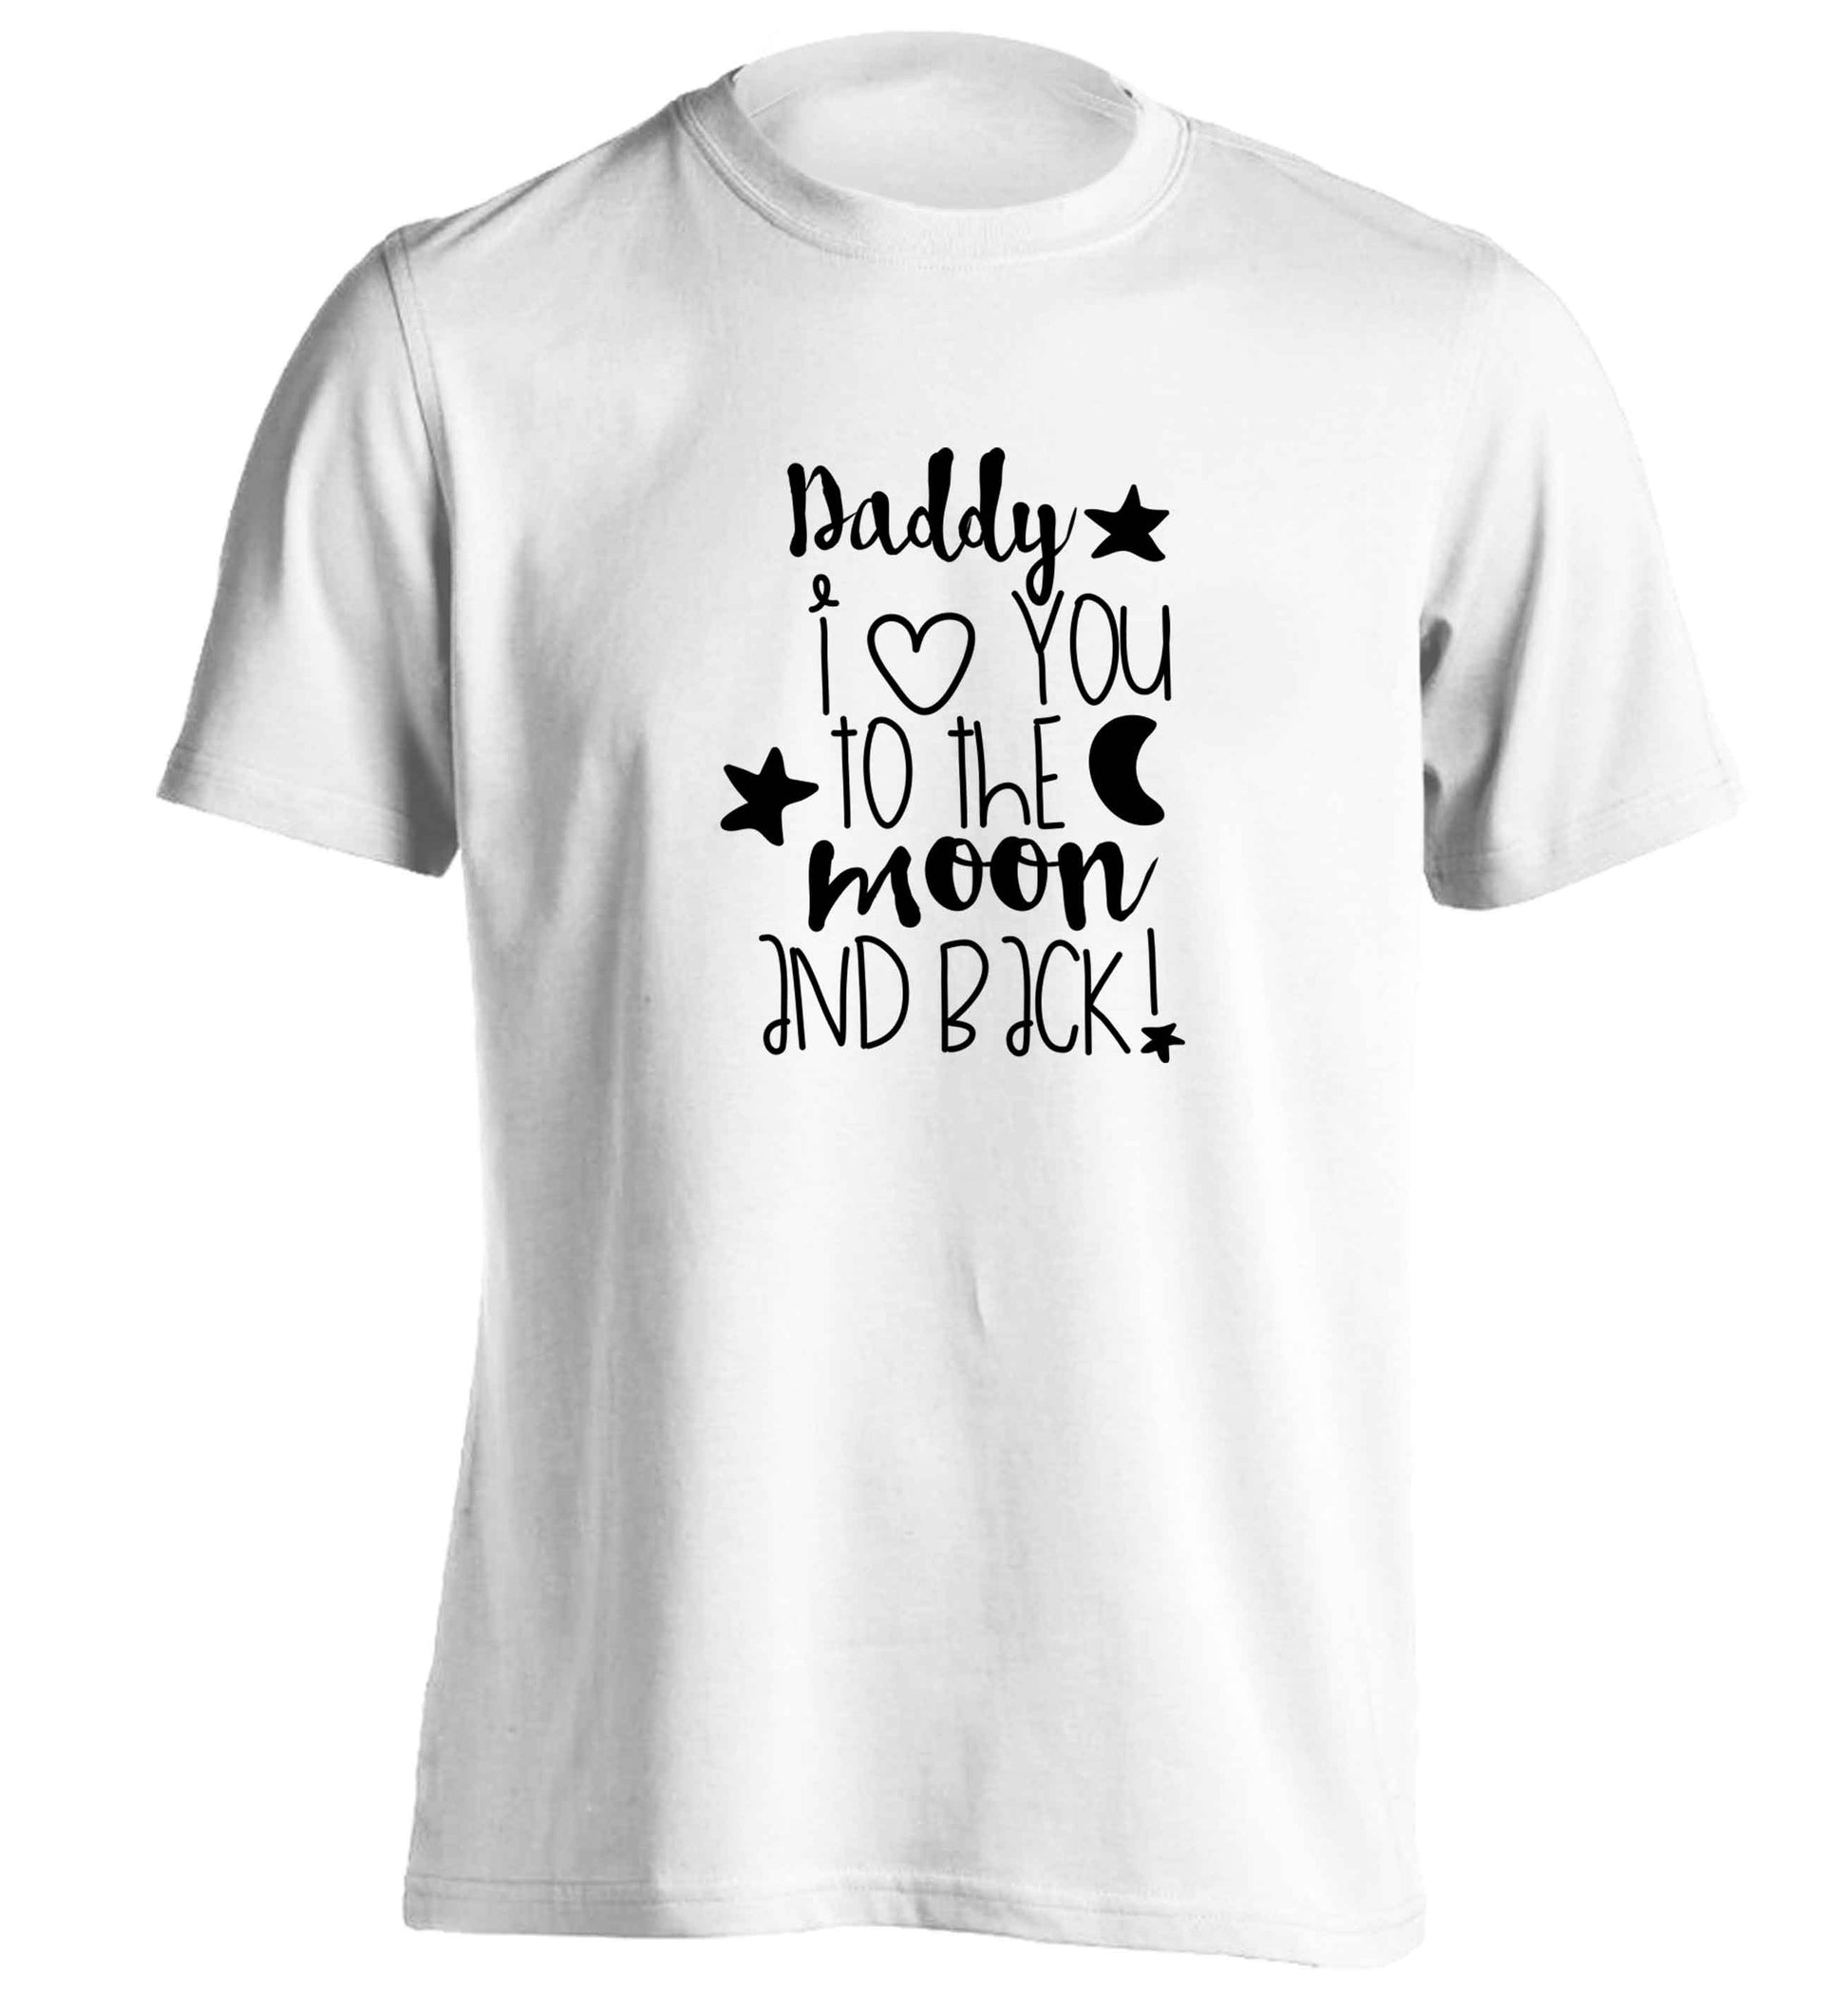 Daddy I love you to the moon and back adults unisex white Tshirt 2XL